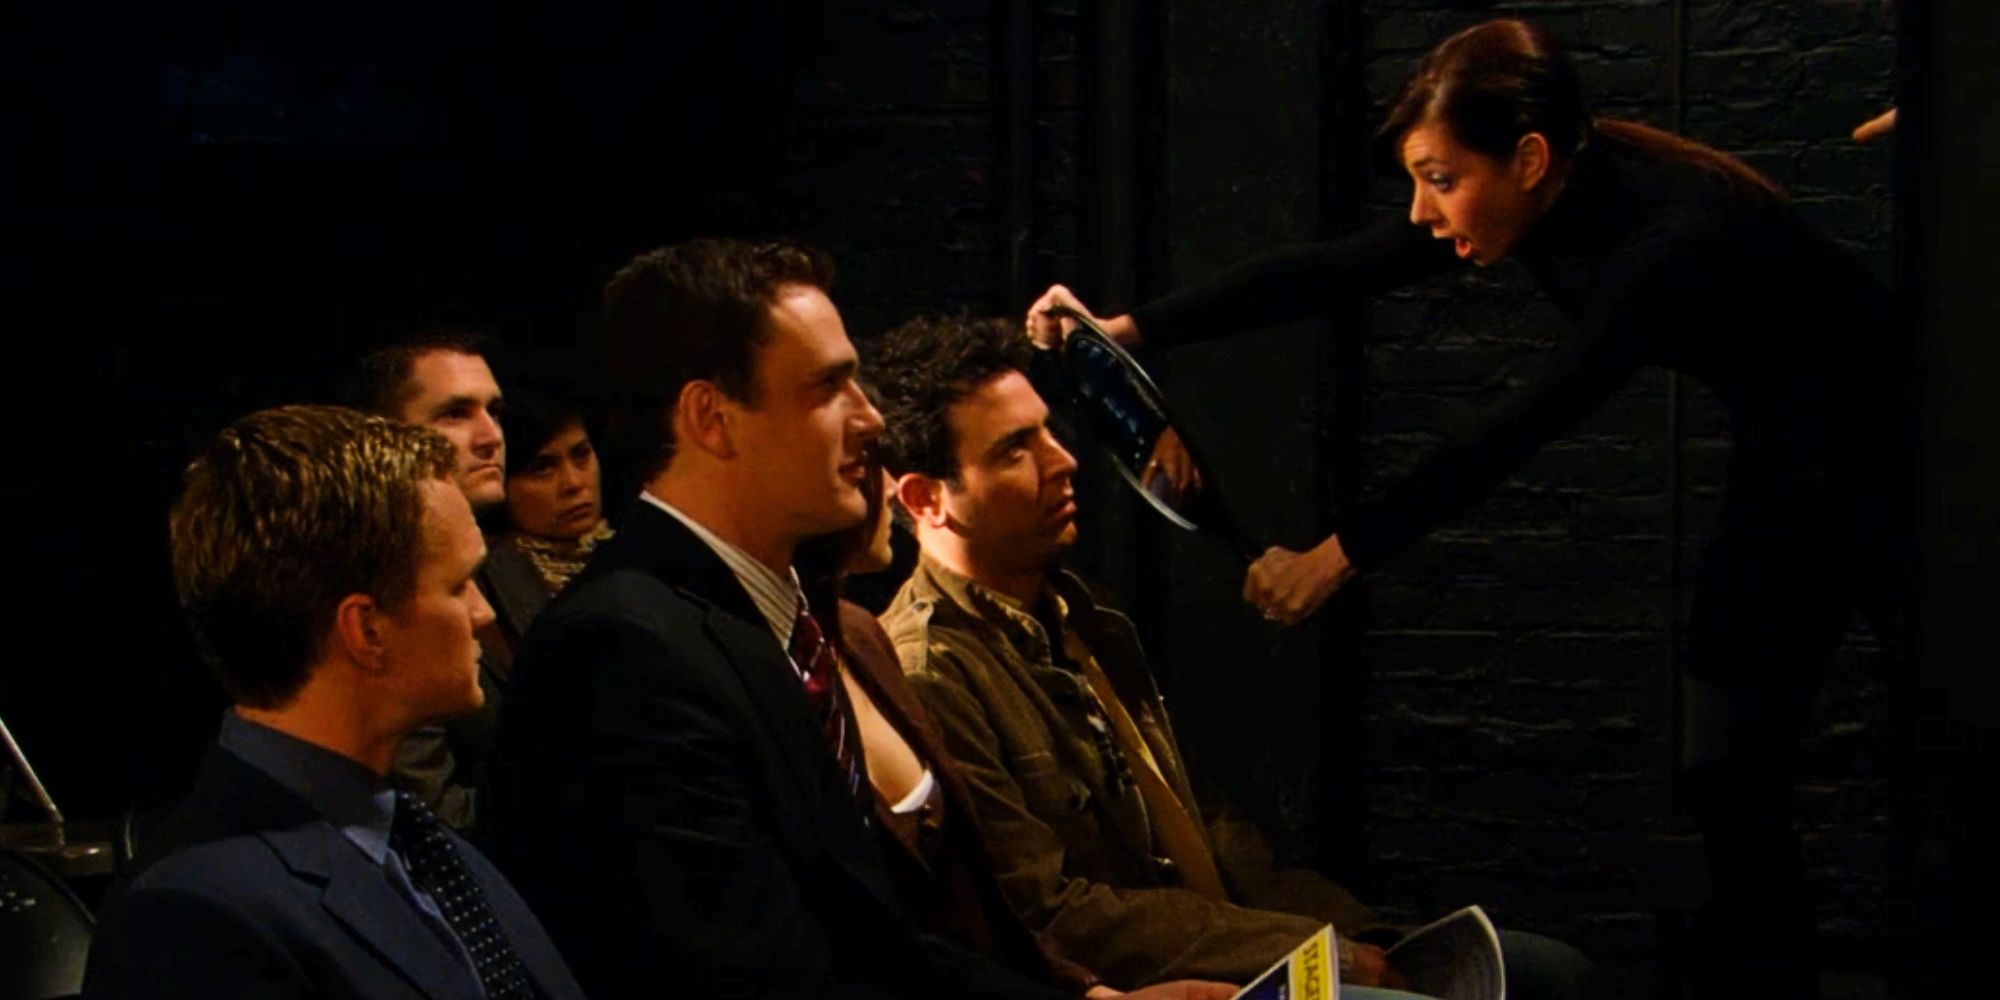 Lily's Play In HIMYM Season 2